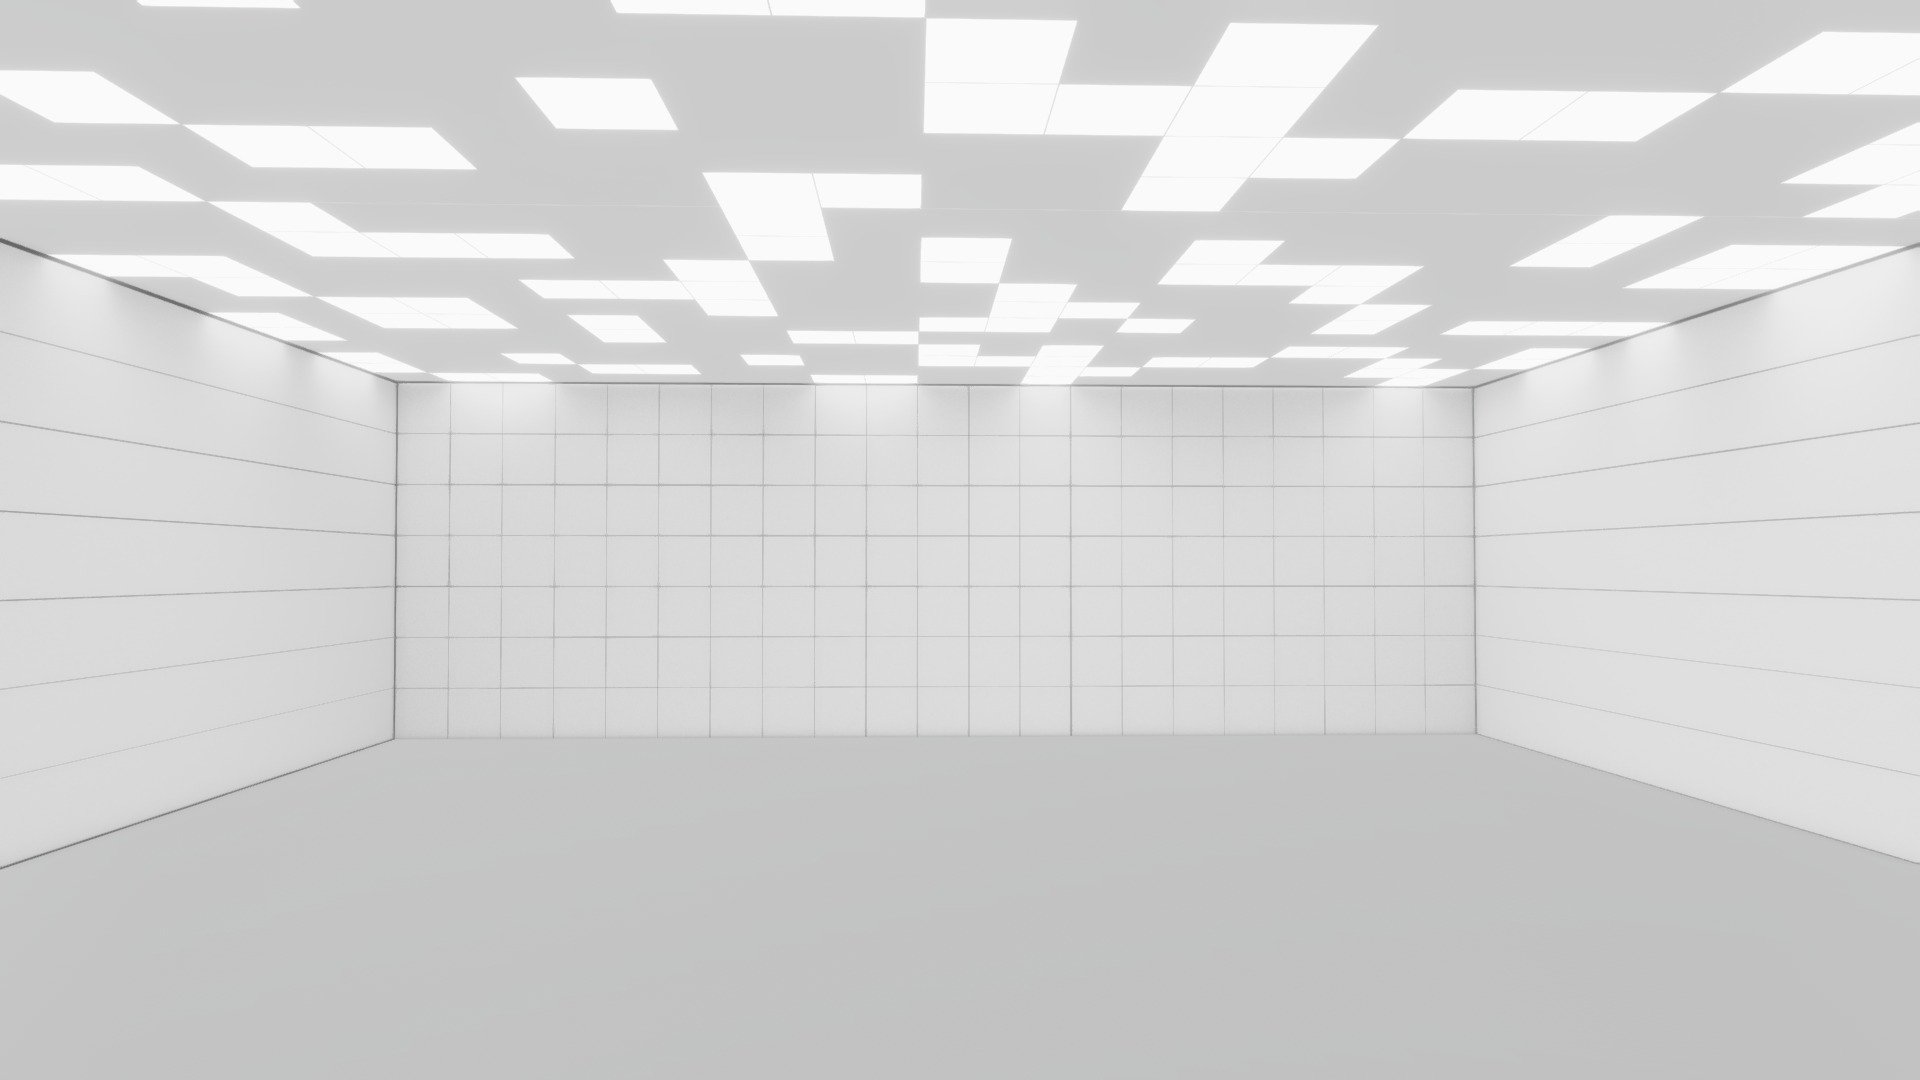 Bright and spacious gallery space, used for online gallery or VR showcase.
Textures baked already.
Built in Blender 3.0 3d model